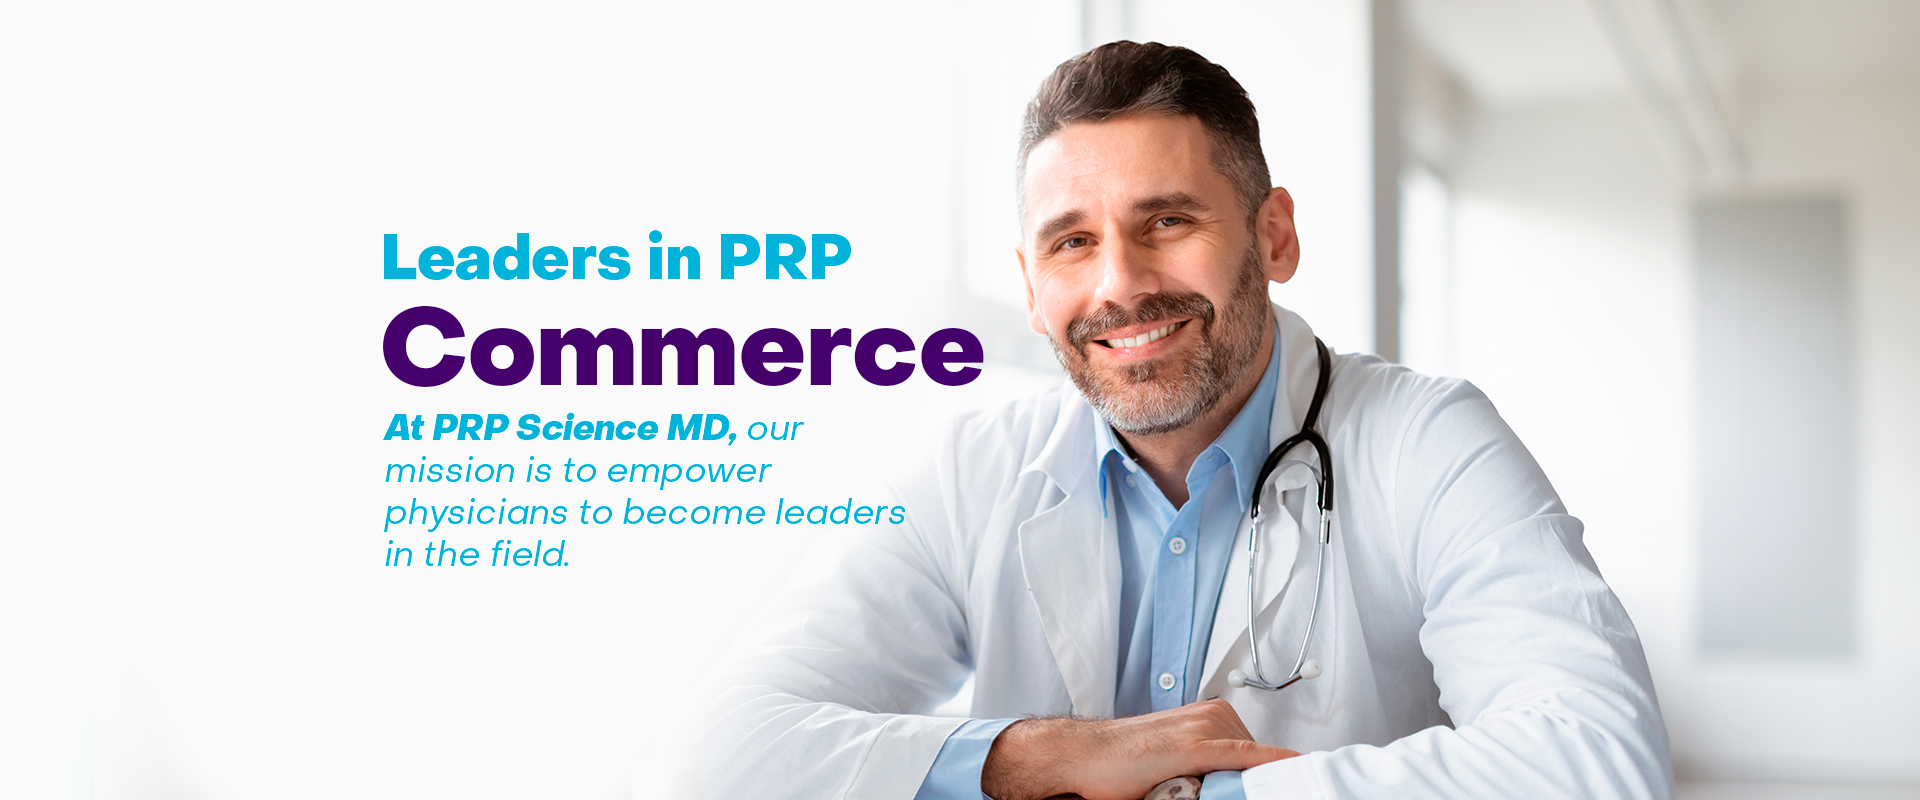 onfident male doctor with a stethoscope around his neck smiling at the camera with text overlay about PRP Commerce.